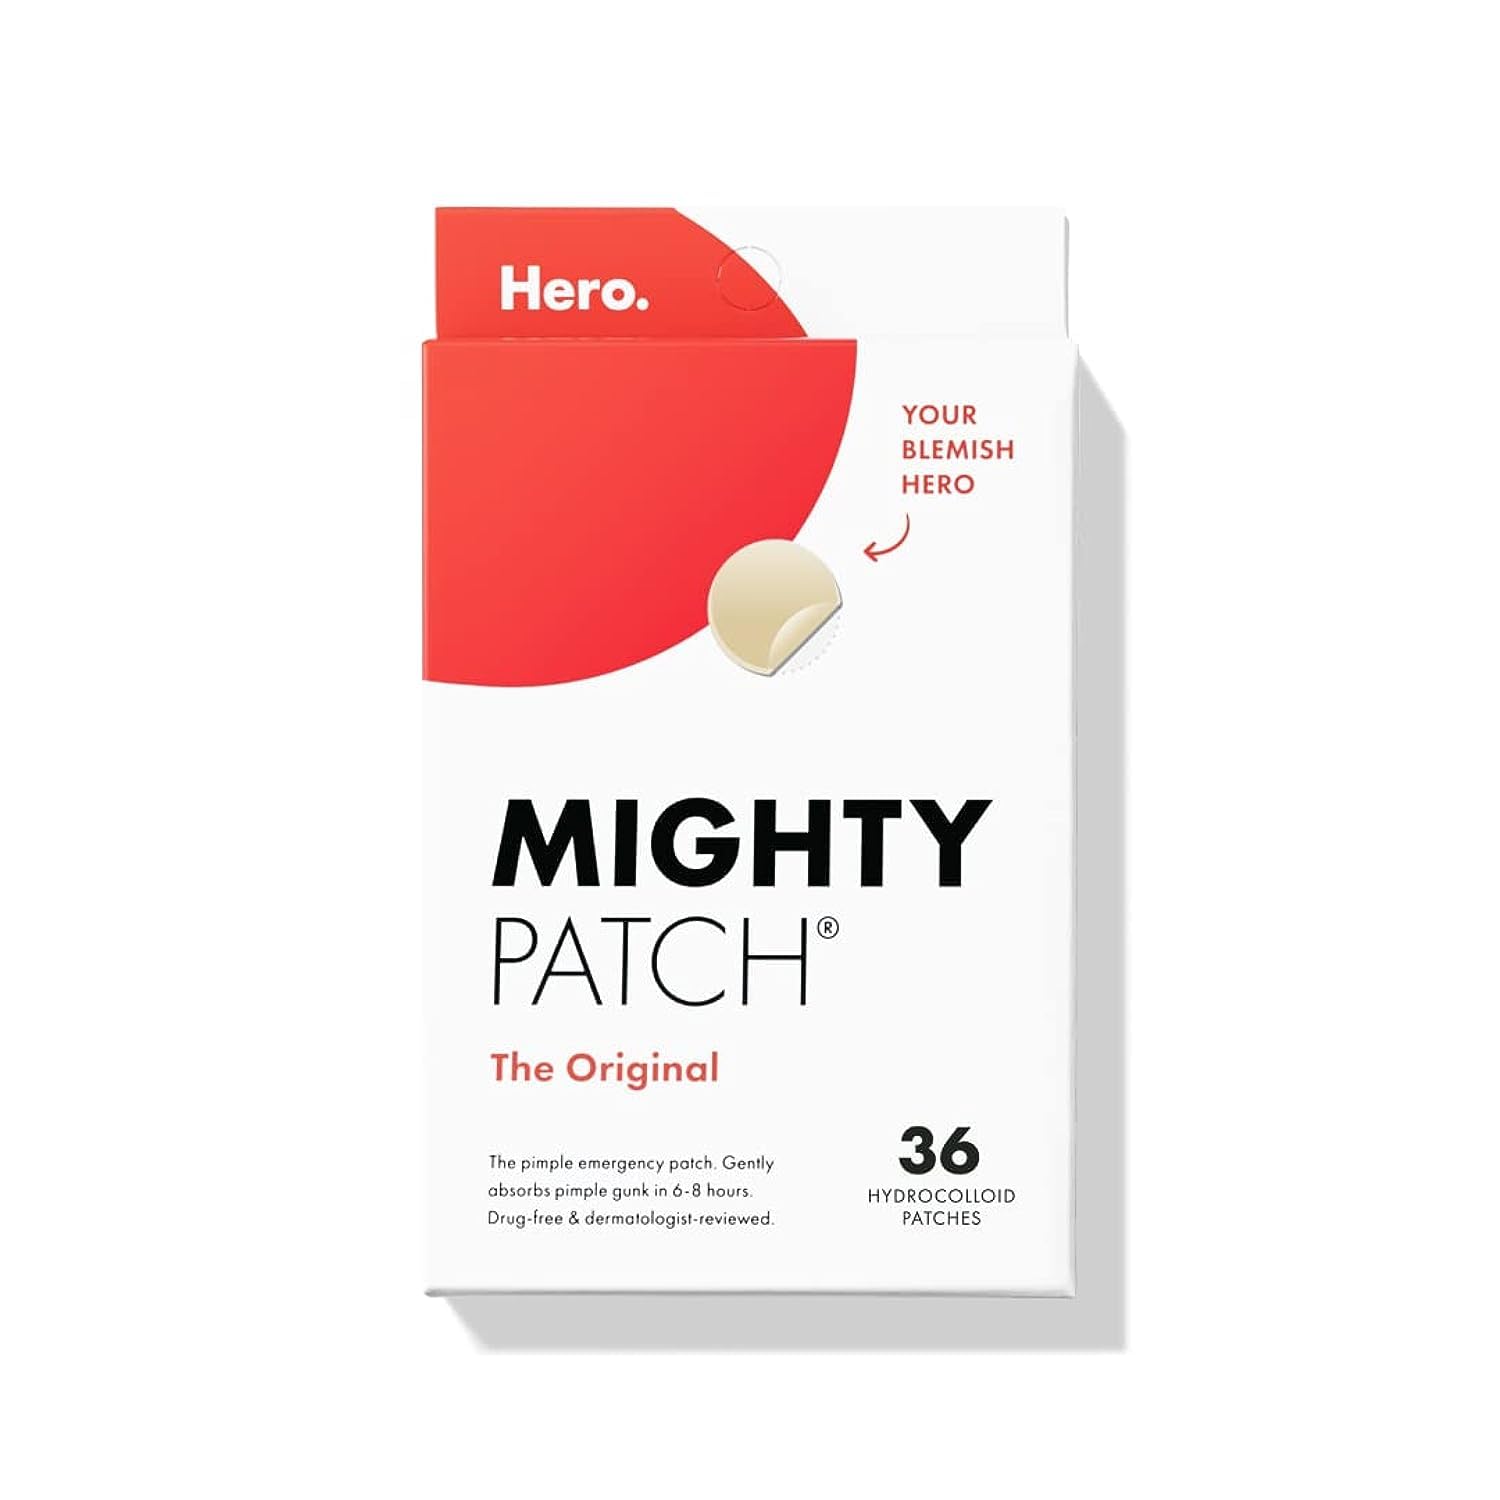 An image of a box of "Mighty Patch" by Hero Cosmetics. The box is white with a red top section and orange text, reading "The Original" and "Your Blemish Hero." It contains 36 hydrocolloid patches for pimple treatment, designed to tackle even the most hardy pimples.